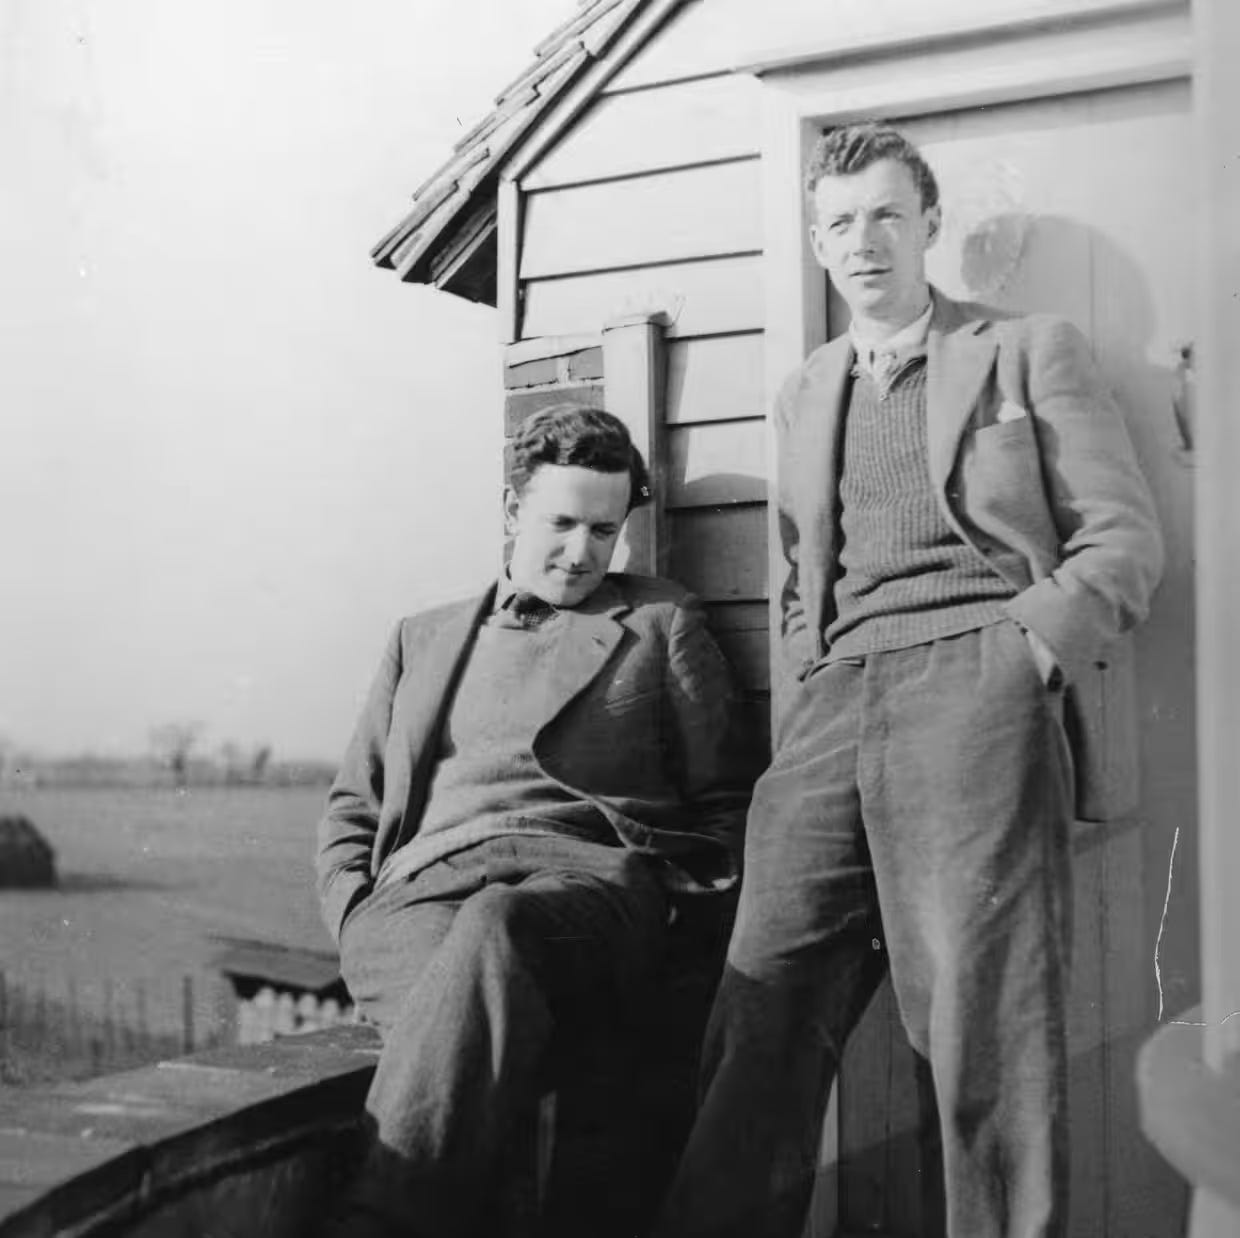 Black and white photo of two men, one seated and one standing, against a small house, with a field and sky visible in the background.